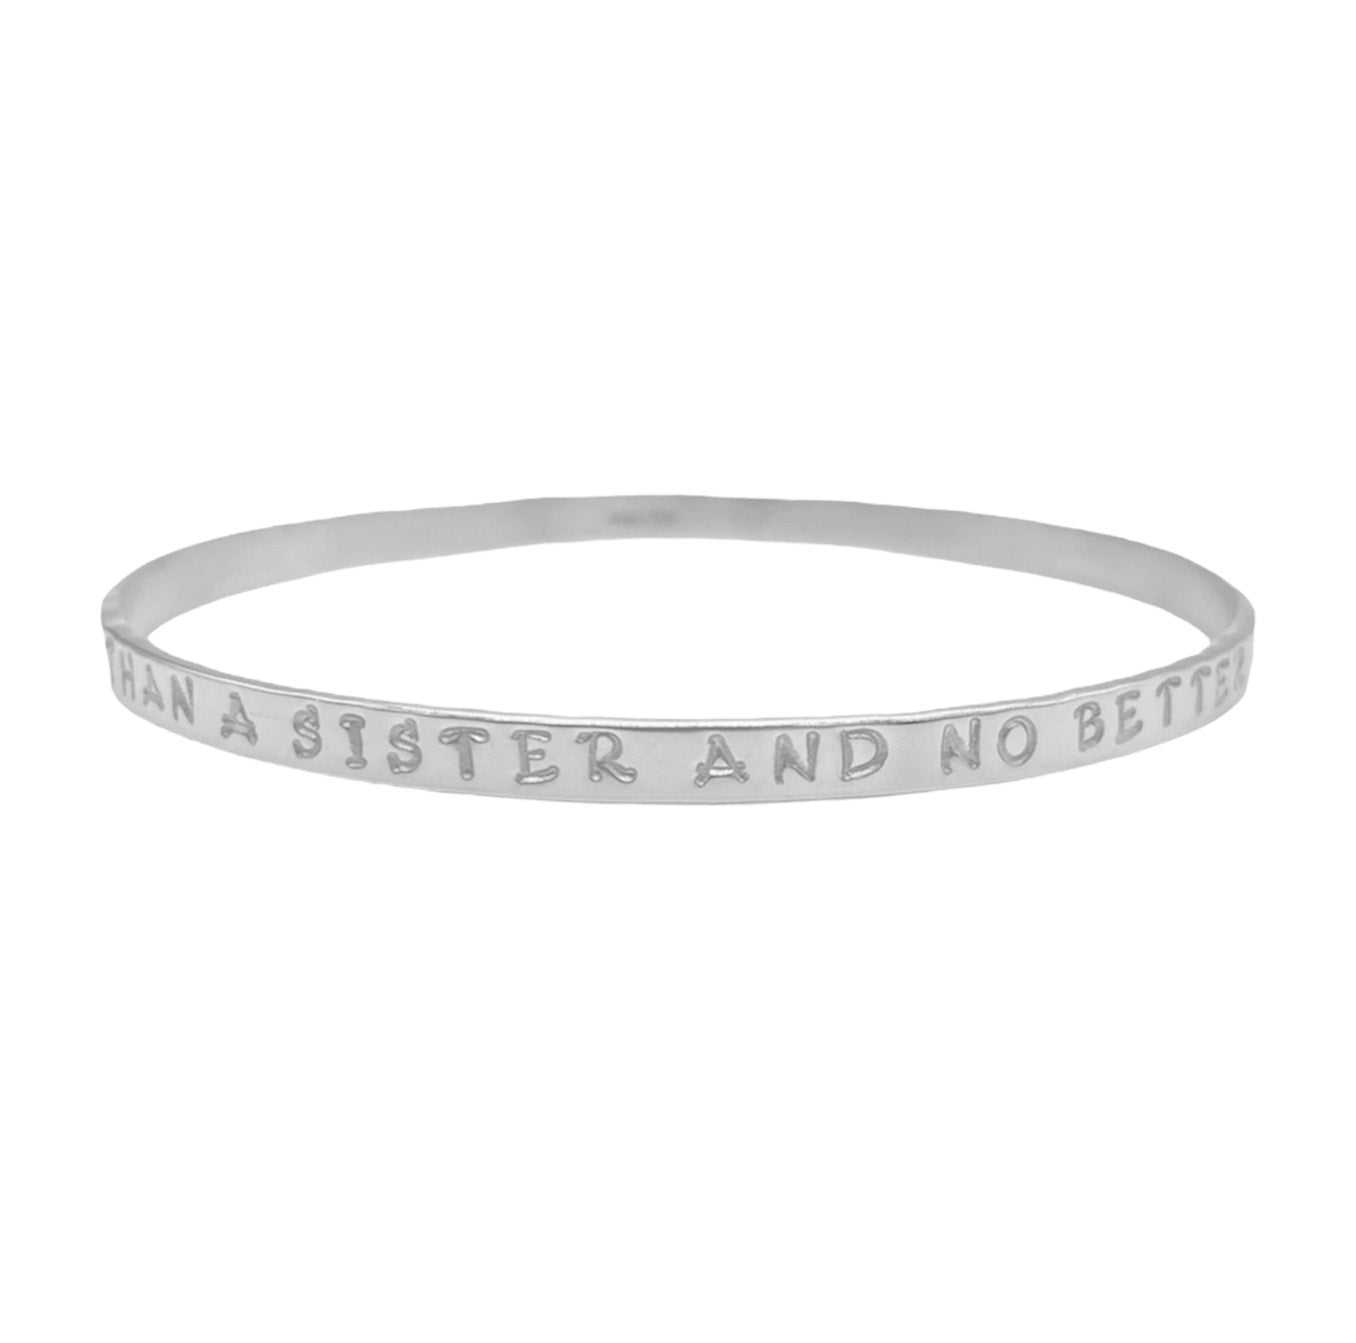 Belle & Bee silver sister quote bangle